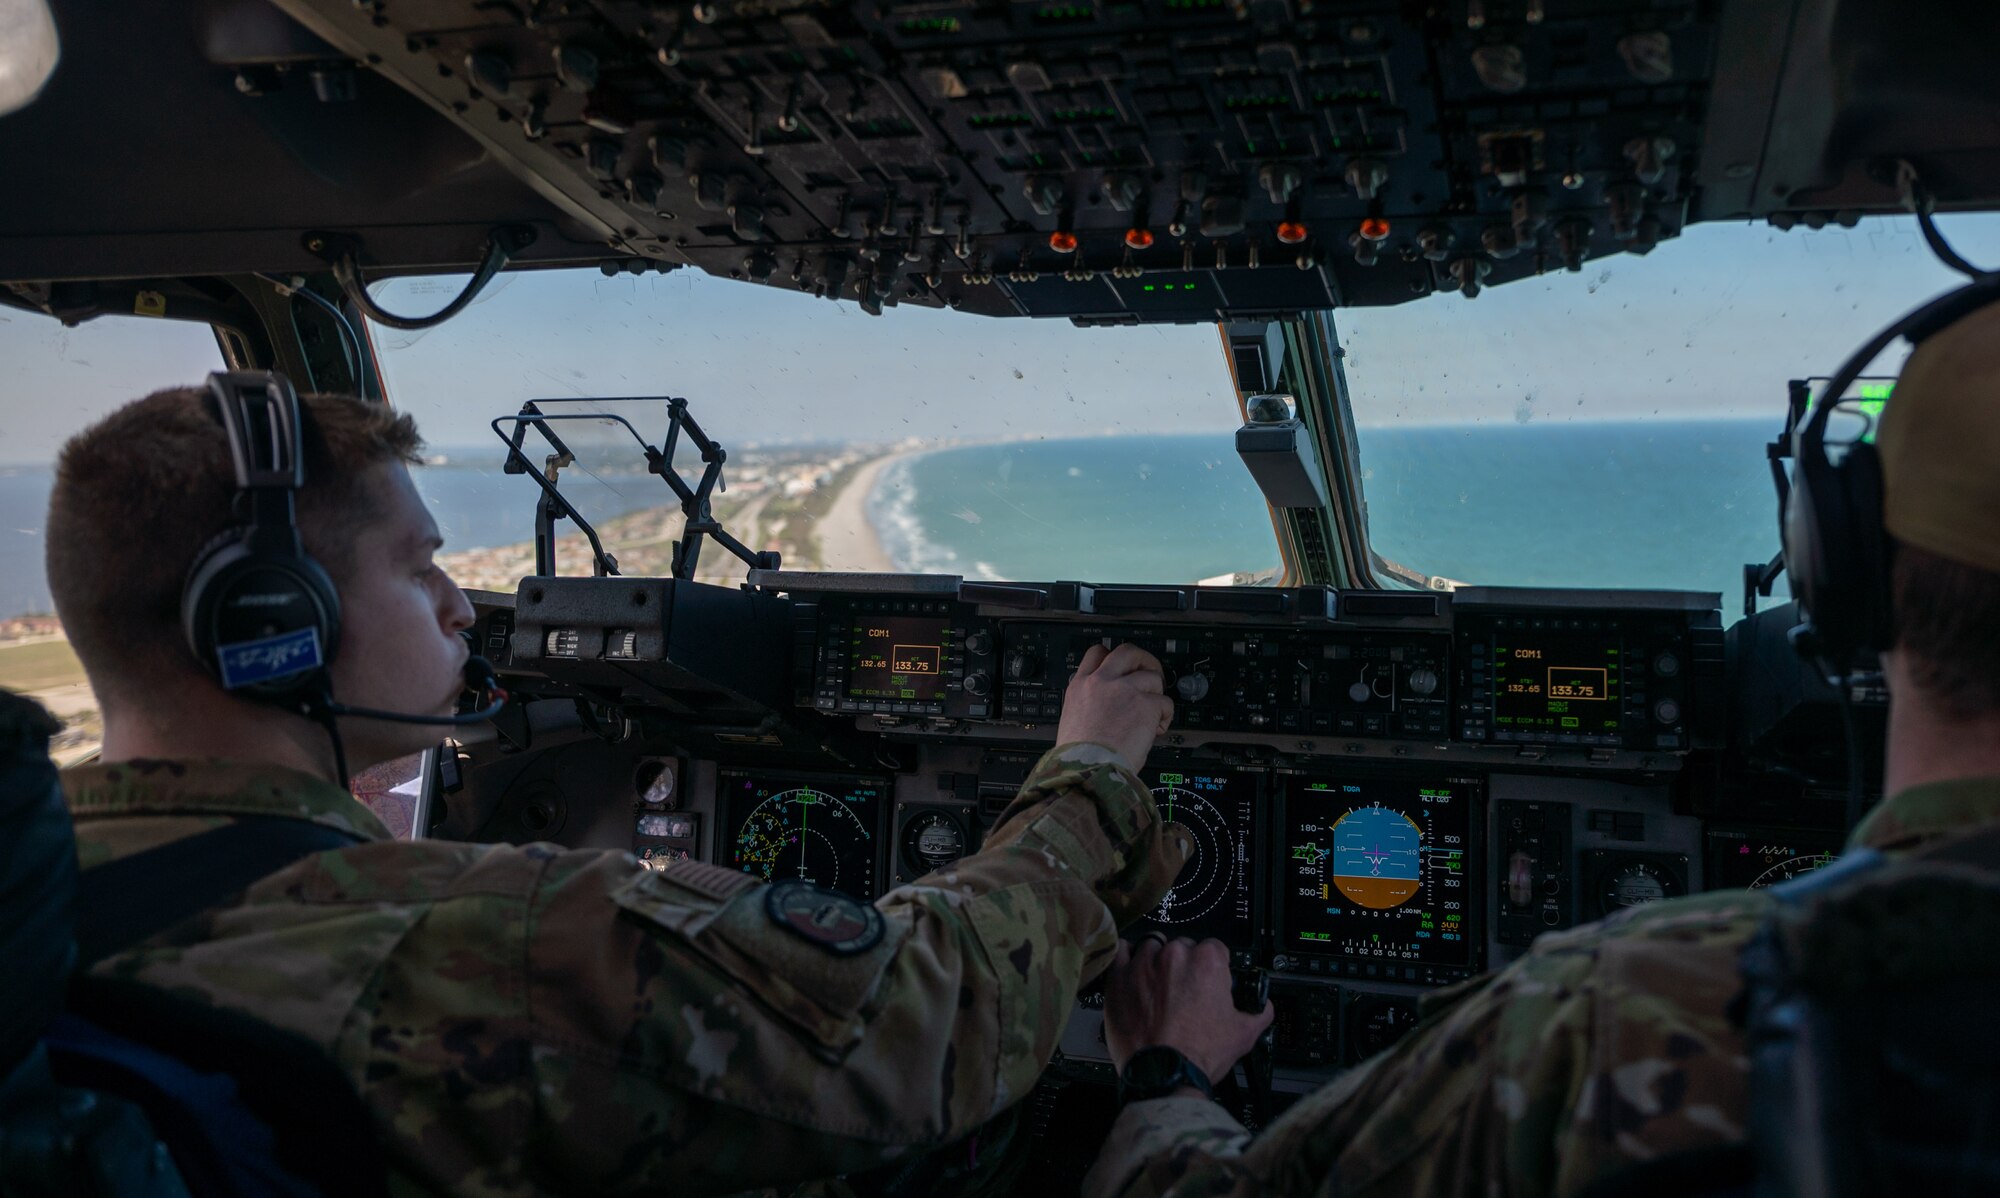 First Lt. August Hein (left) and Capt. Reed Fleming, both 3rd Airlift Squadron pilots from Dover Air Force Base fly a Dover AFB C-17 Globemaster III over Florida during Exercise Mosaic Tiger, Feb. 25, 2021. Mobility Airmen from Dover AFB and Joint Base McGuire-Dix-Lakehurst, New Jersey, participated in the exercise to enhance readiness and reinforce Air Mobility Command support to the joint warfighter. (U.S. Air Force photo by Airman 1st Class Faith Schaefer)